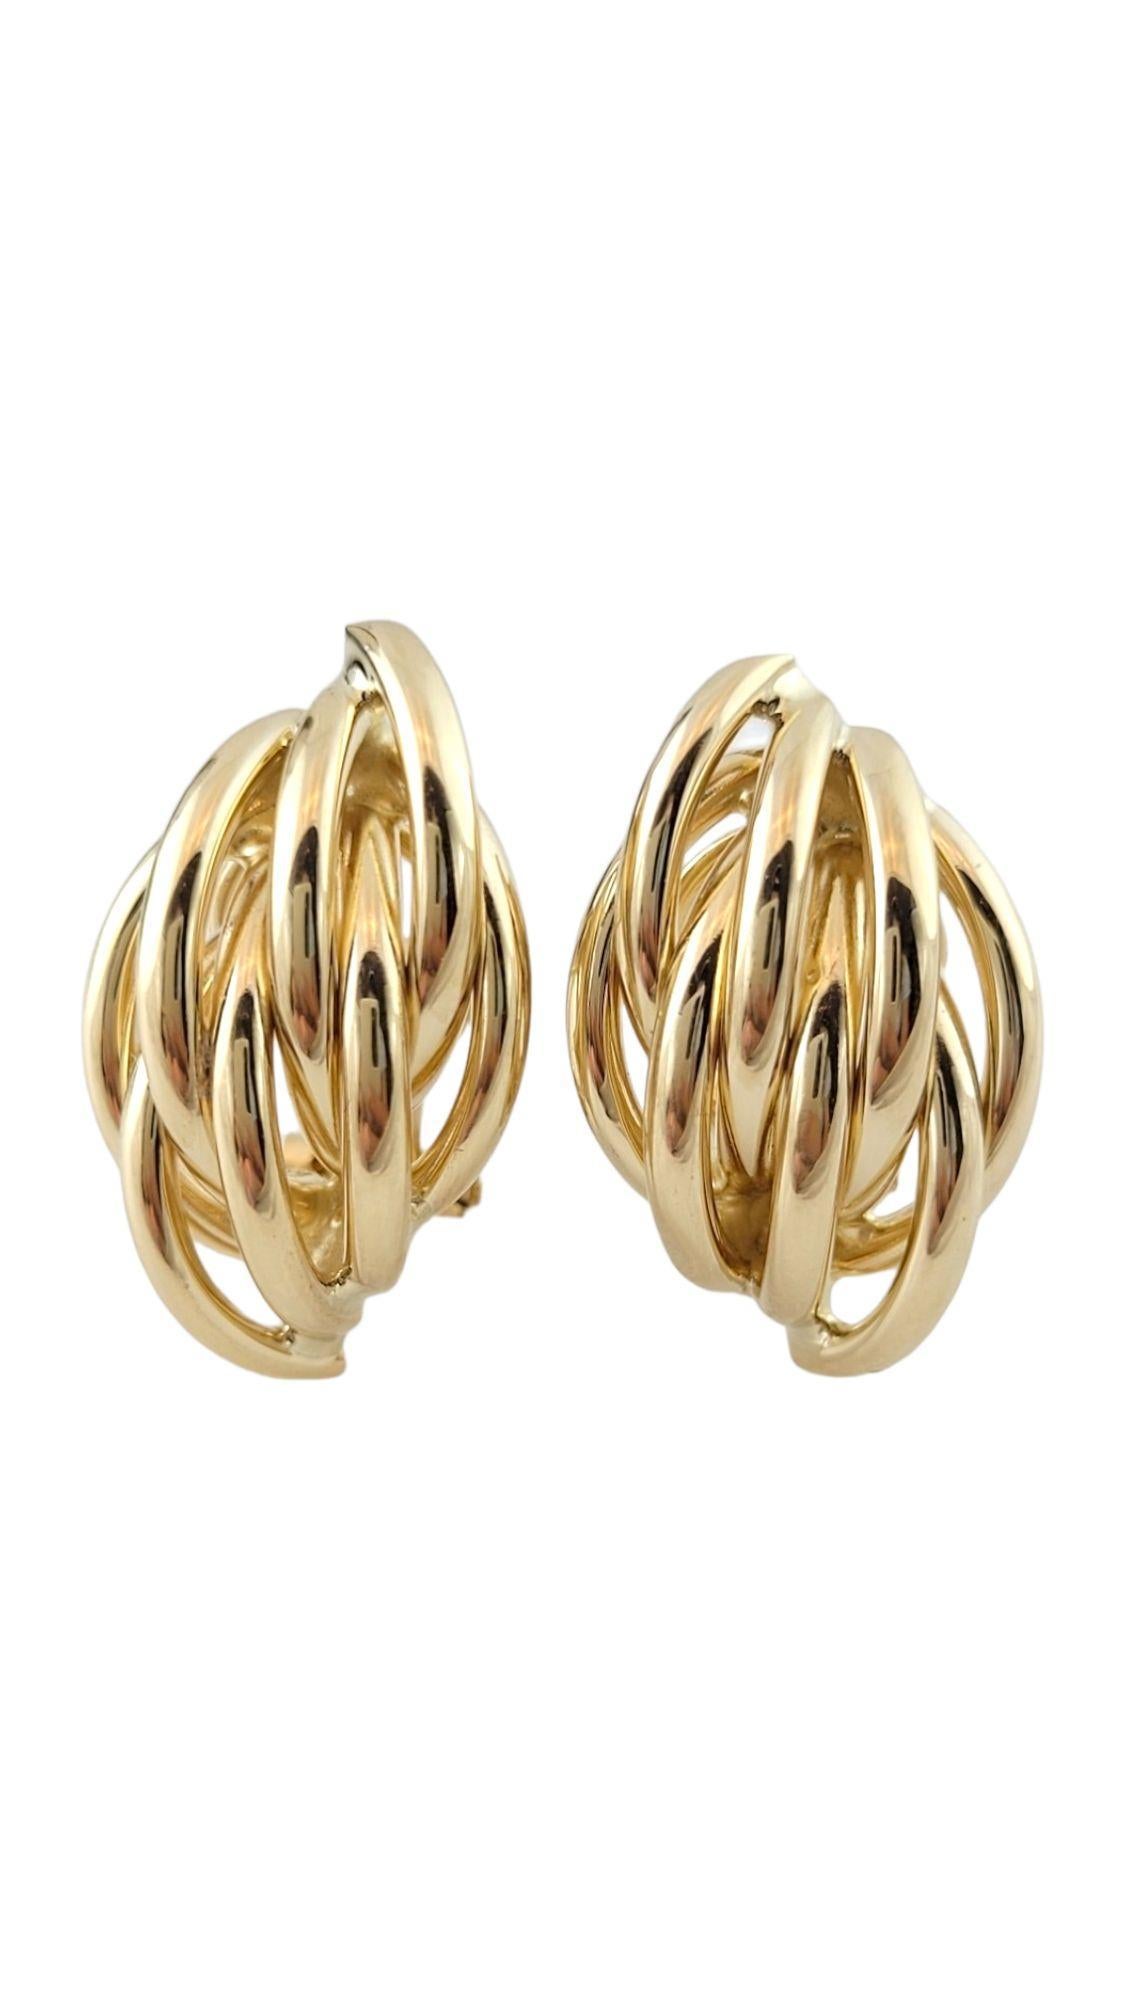 14K Yellow Gold Weave Earrings

This gorgeous set of weave earrings are crafted from 14K yellow gold!

Size: 25.7mm X 14.6mm X 7.7mm

Weight: 6.62 g/ 4.3 dwt

Hallmark: 14K

Very good condition, professionally polished.

Will come packaged in a gift